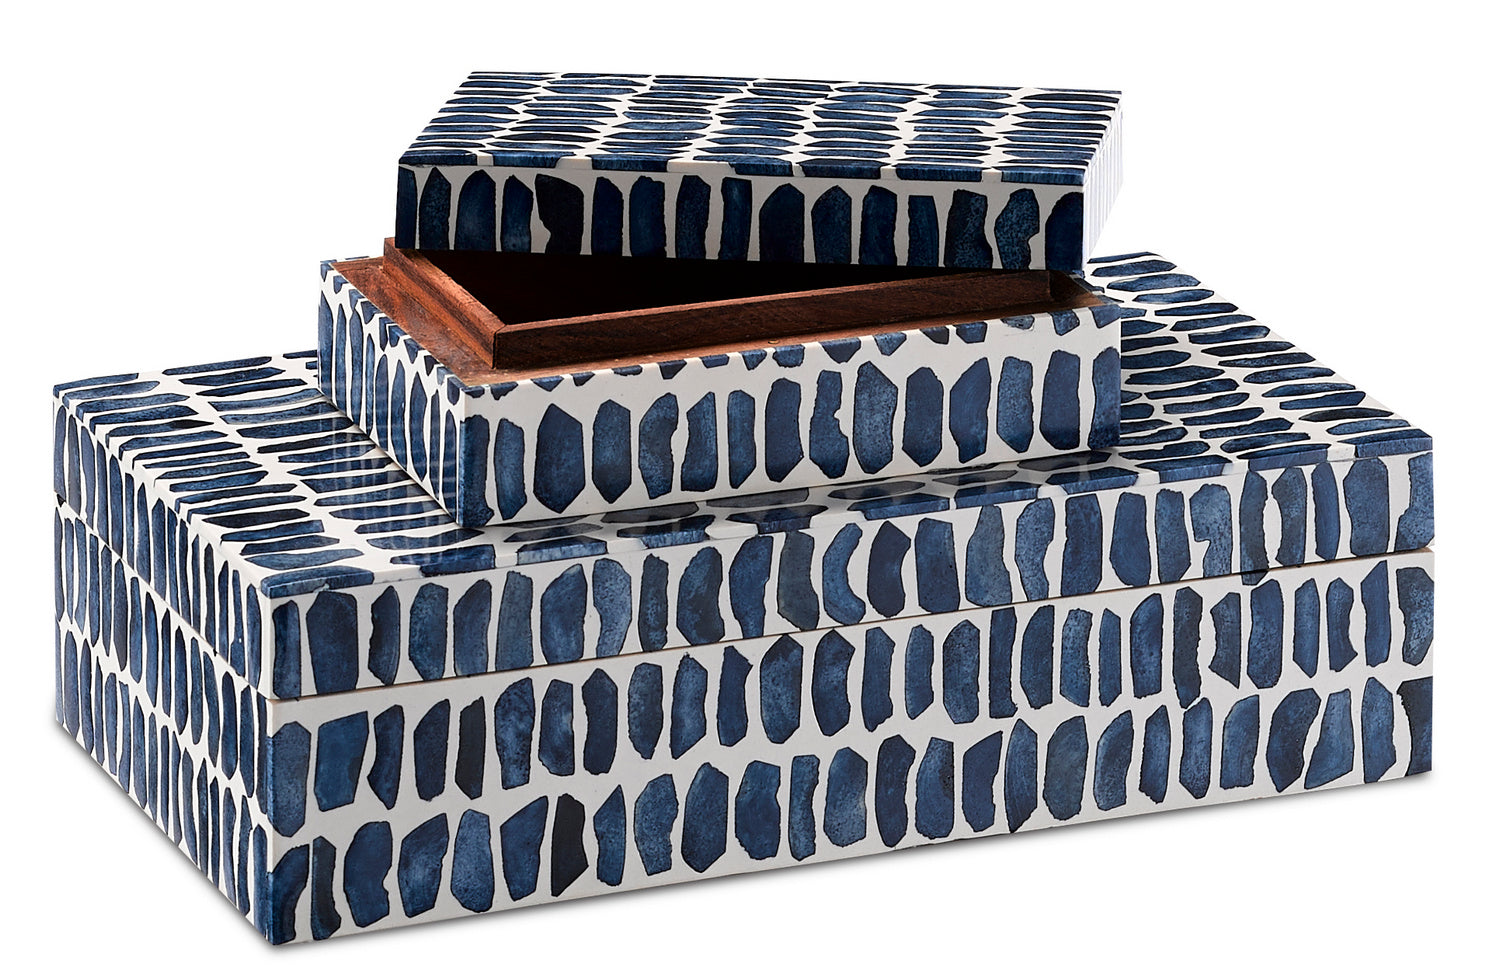 Box Set from the Indigo collection in Navy/White/Natural finish